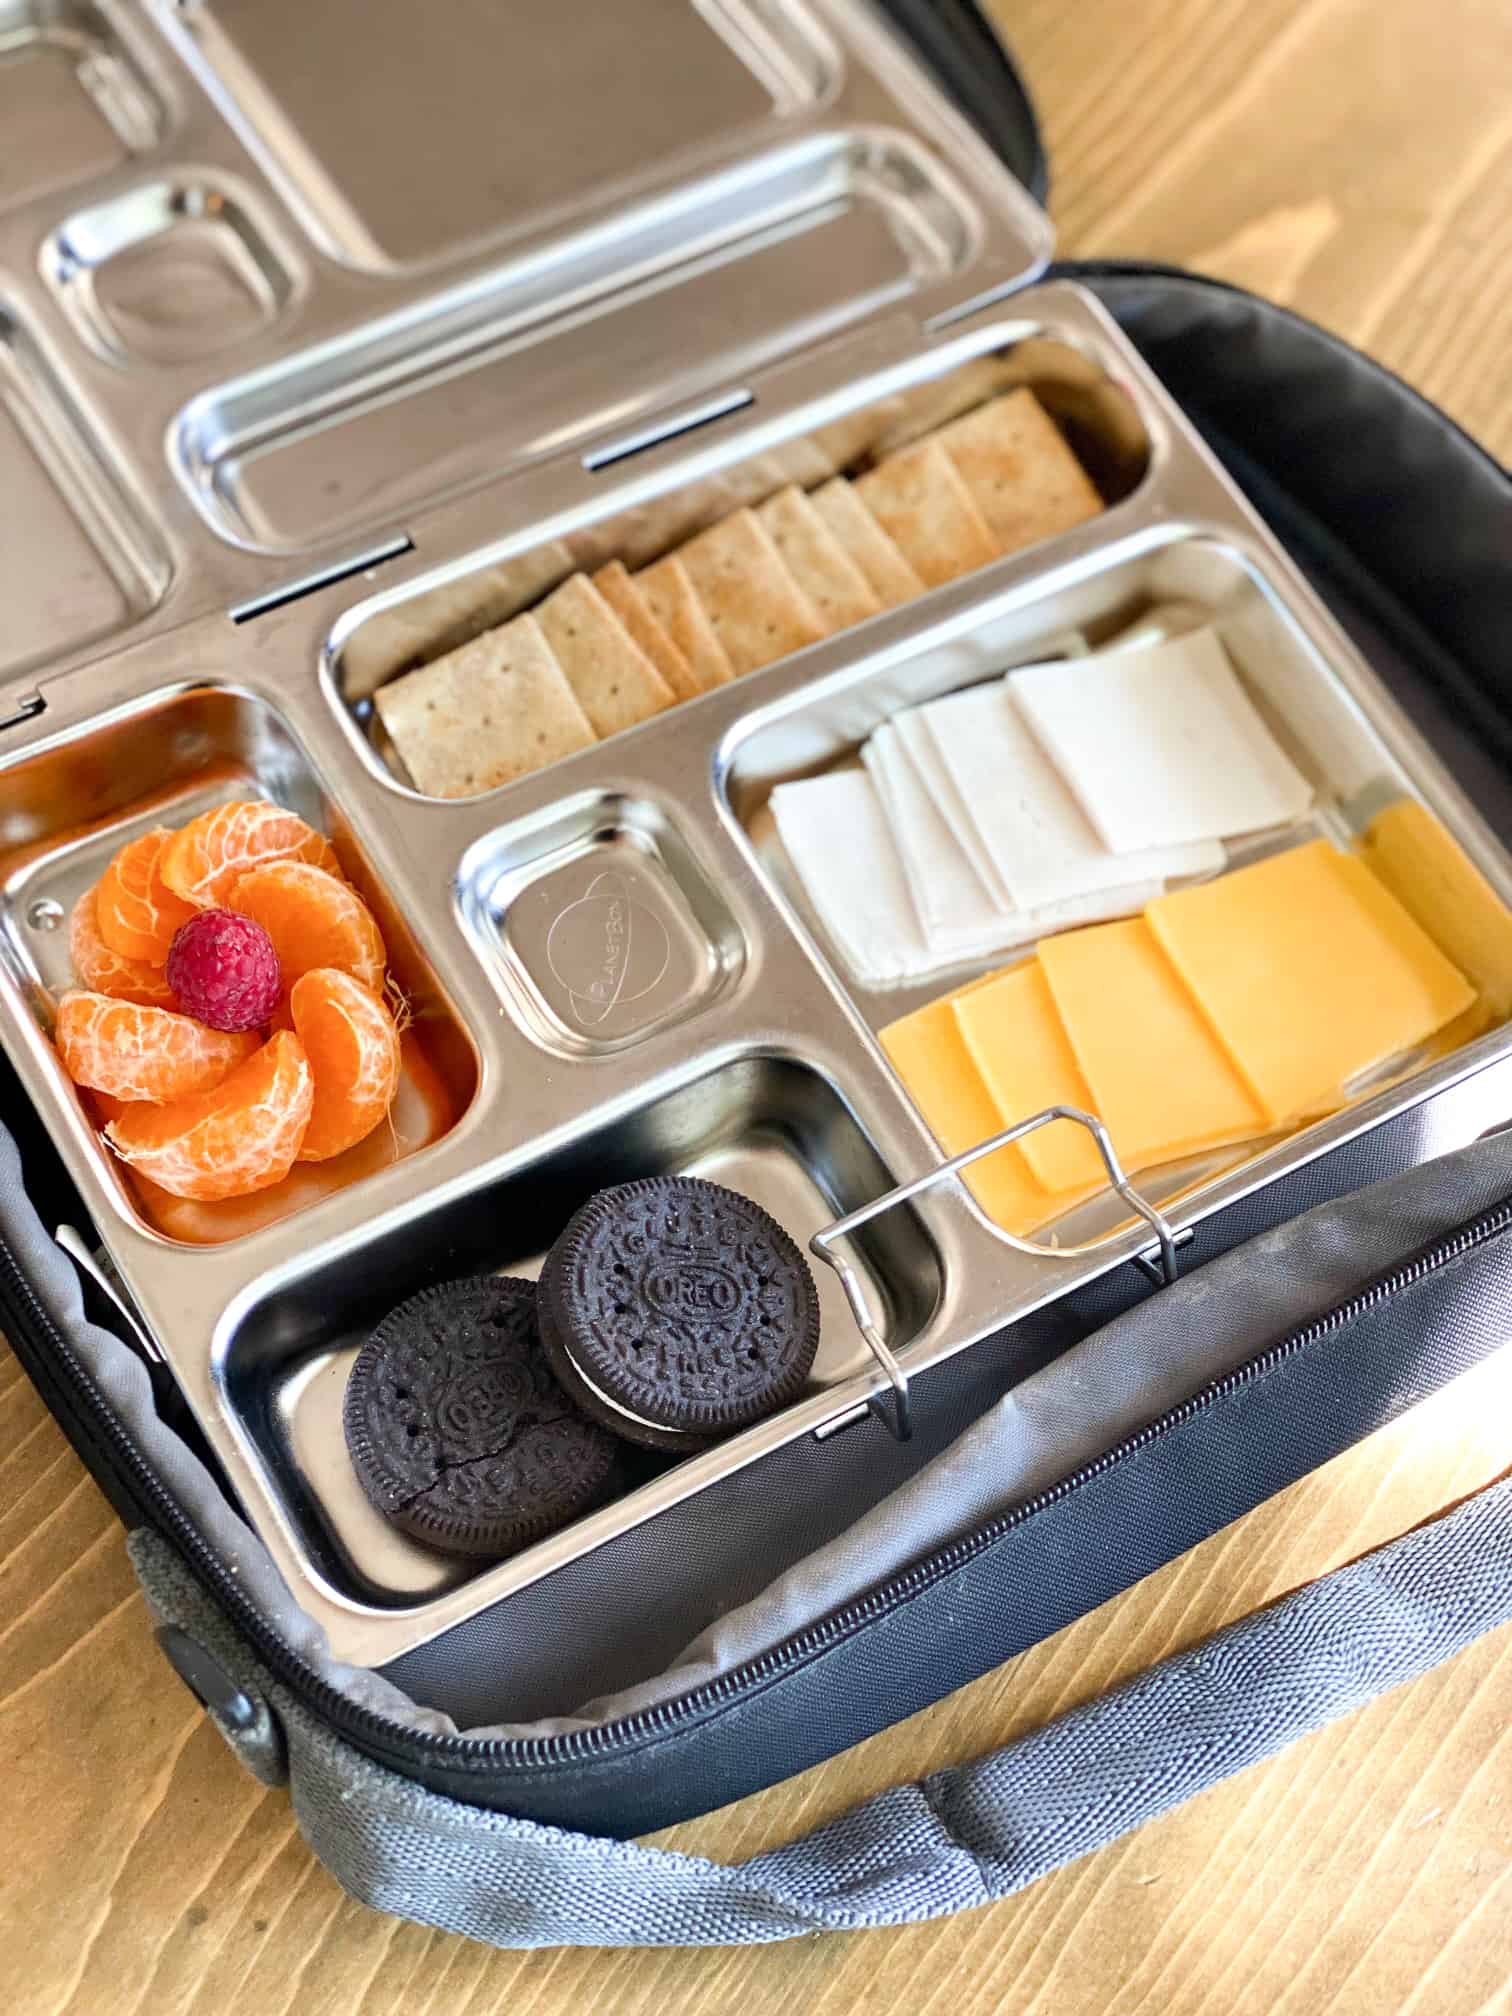 Homemade Pizza Lunchable for Back to School - Glitter On A Dime